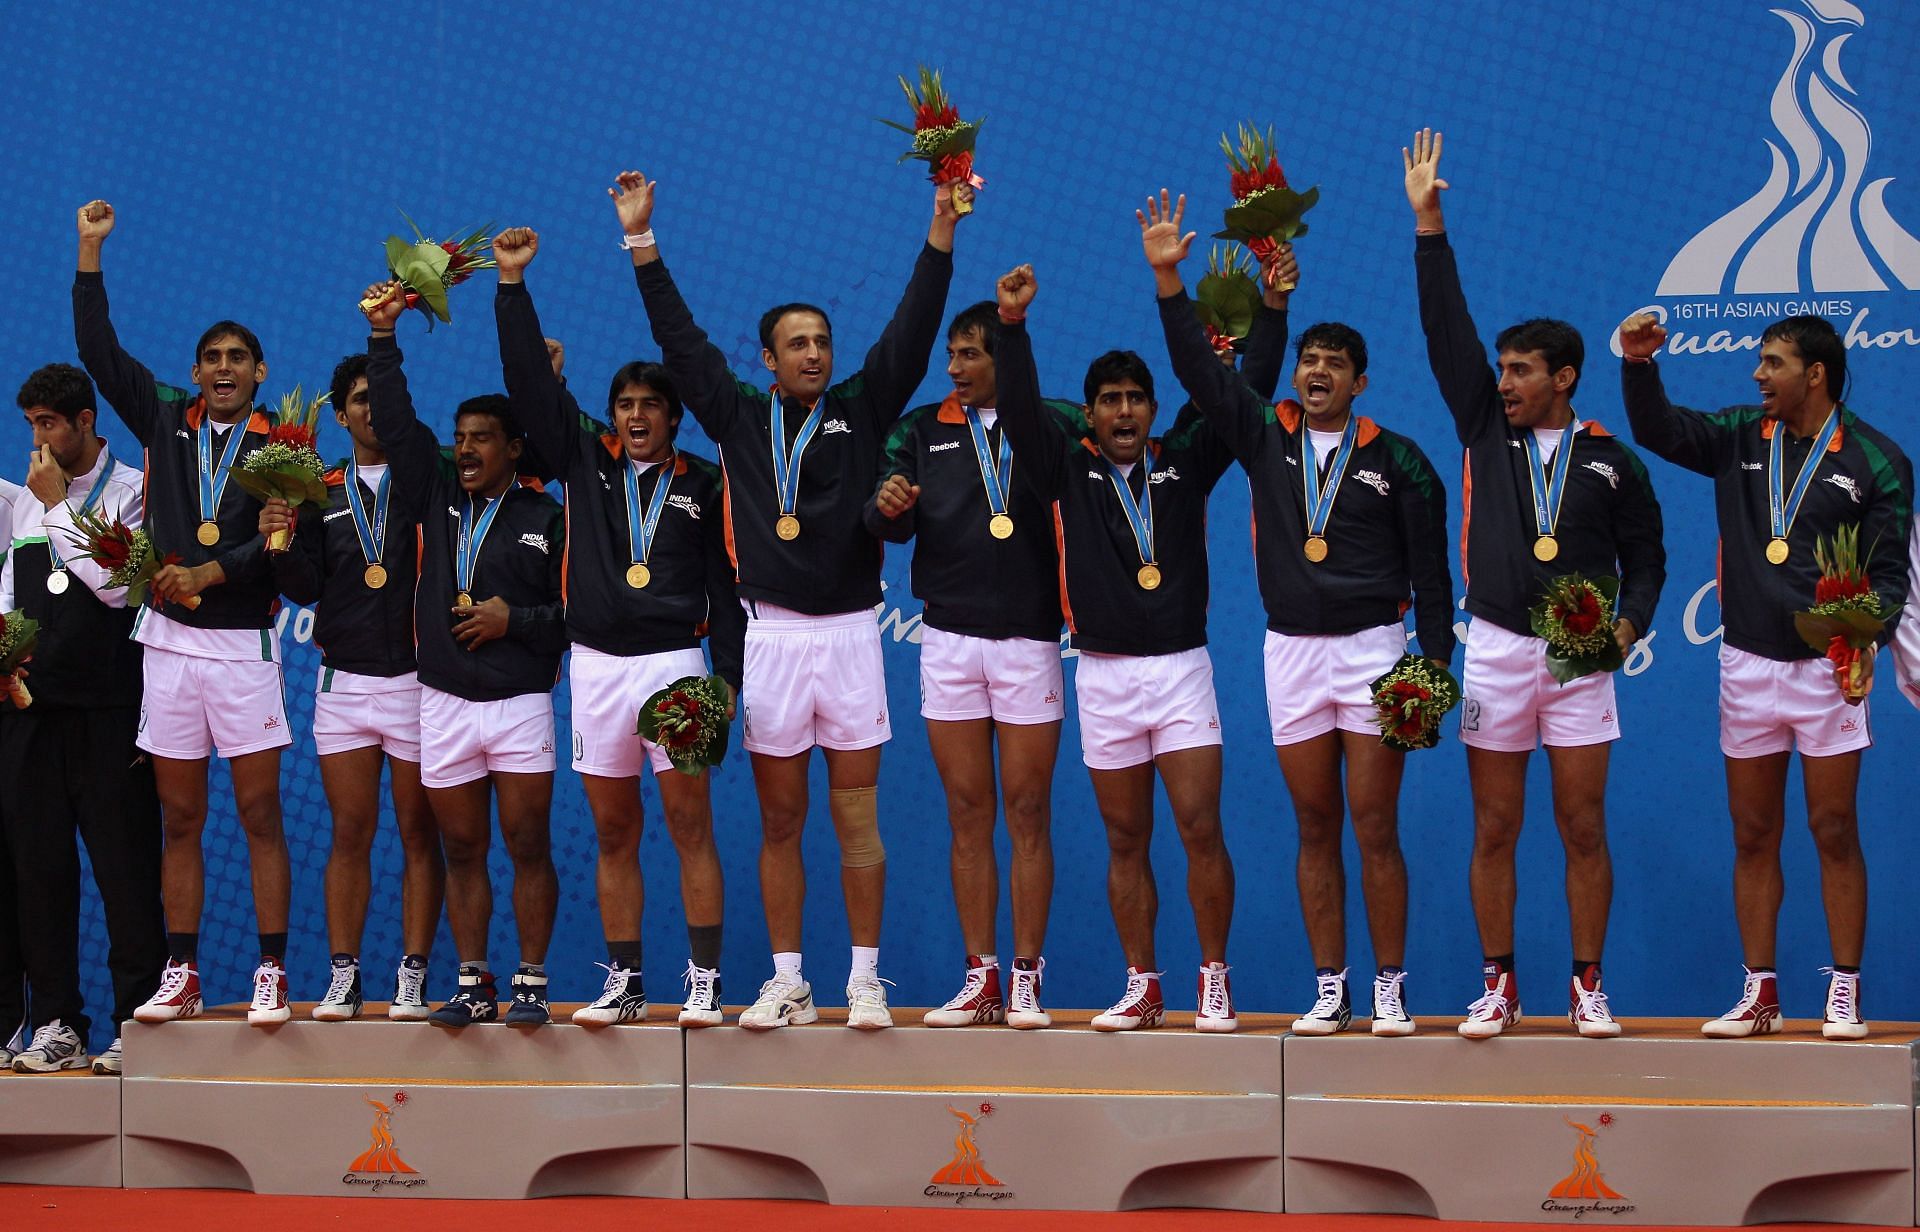 16th Asian Games - Indian kabaddi team (Image via Getty Images)